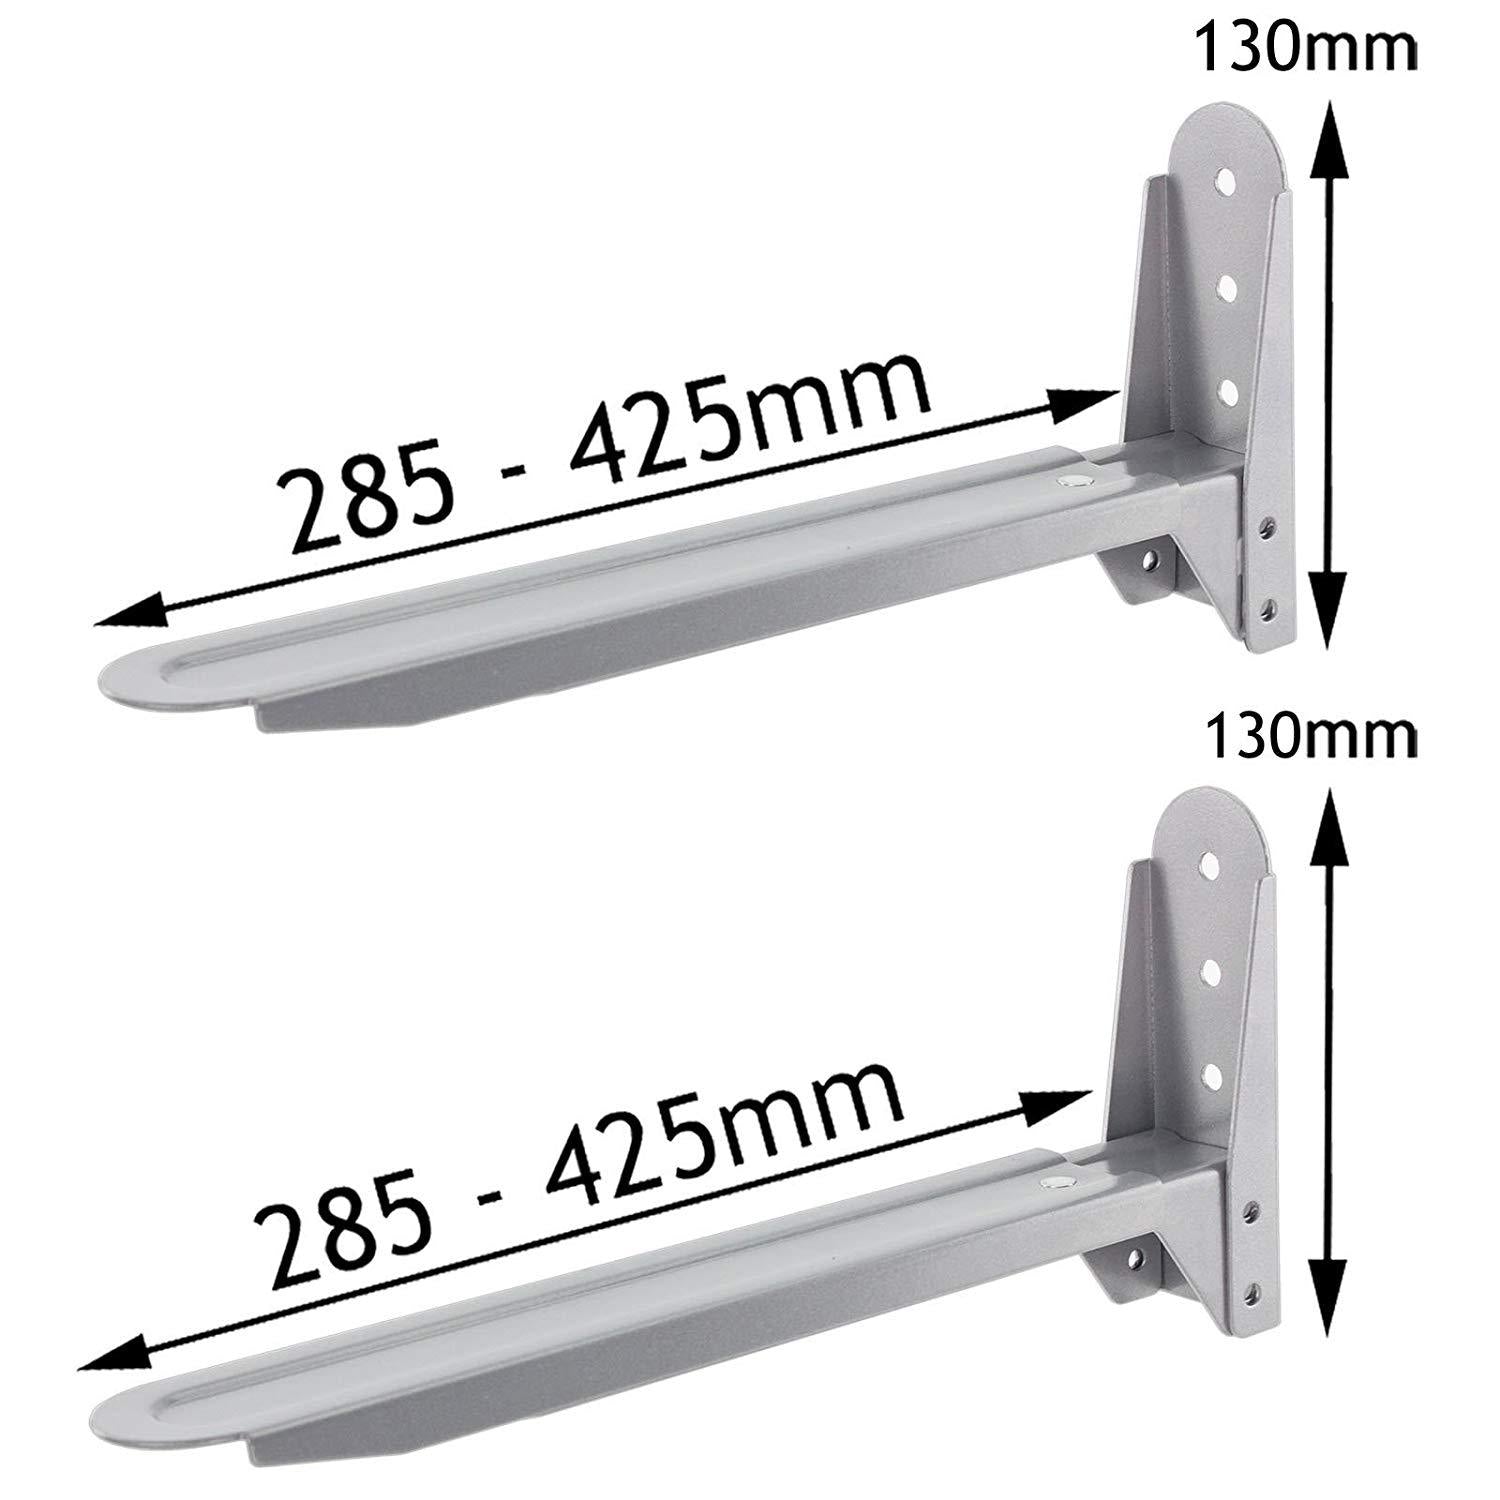 Silver Wall Mount Brackets for Morphy Richards Microwave x 2